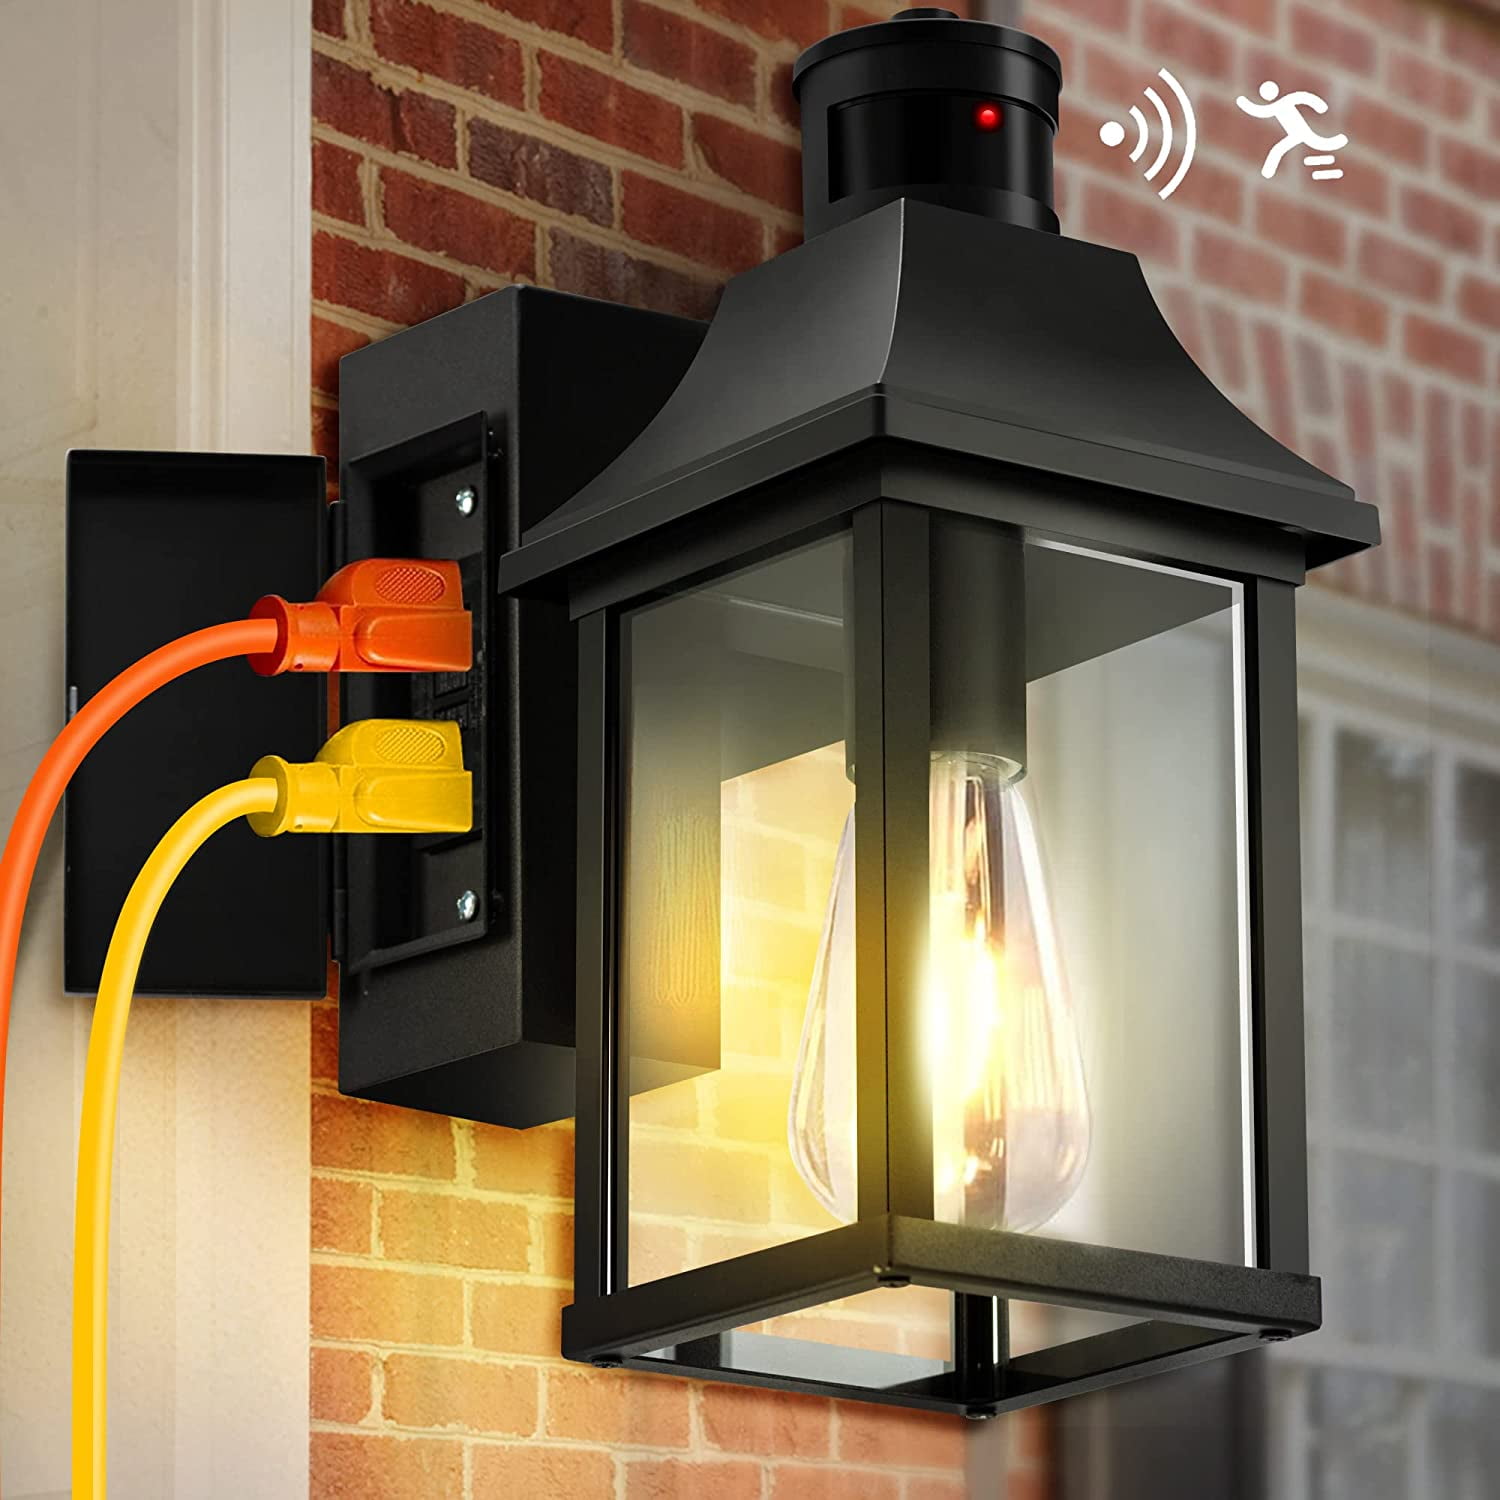 Porch Lights with GFCI Outlet, Dusk to Dawn Motion Sensor Outdoor Lights,  Lighting Modes Front Door Lights, Waterproof Exterior Light Fixture, Outside  Wall Sconce for House Patio Garage